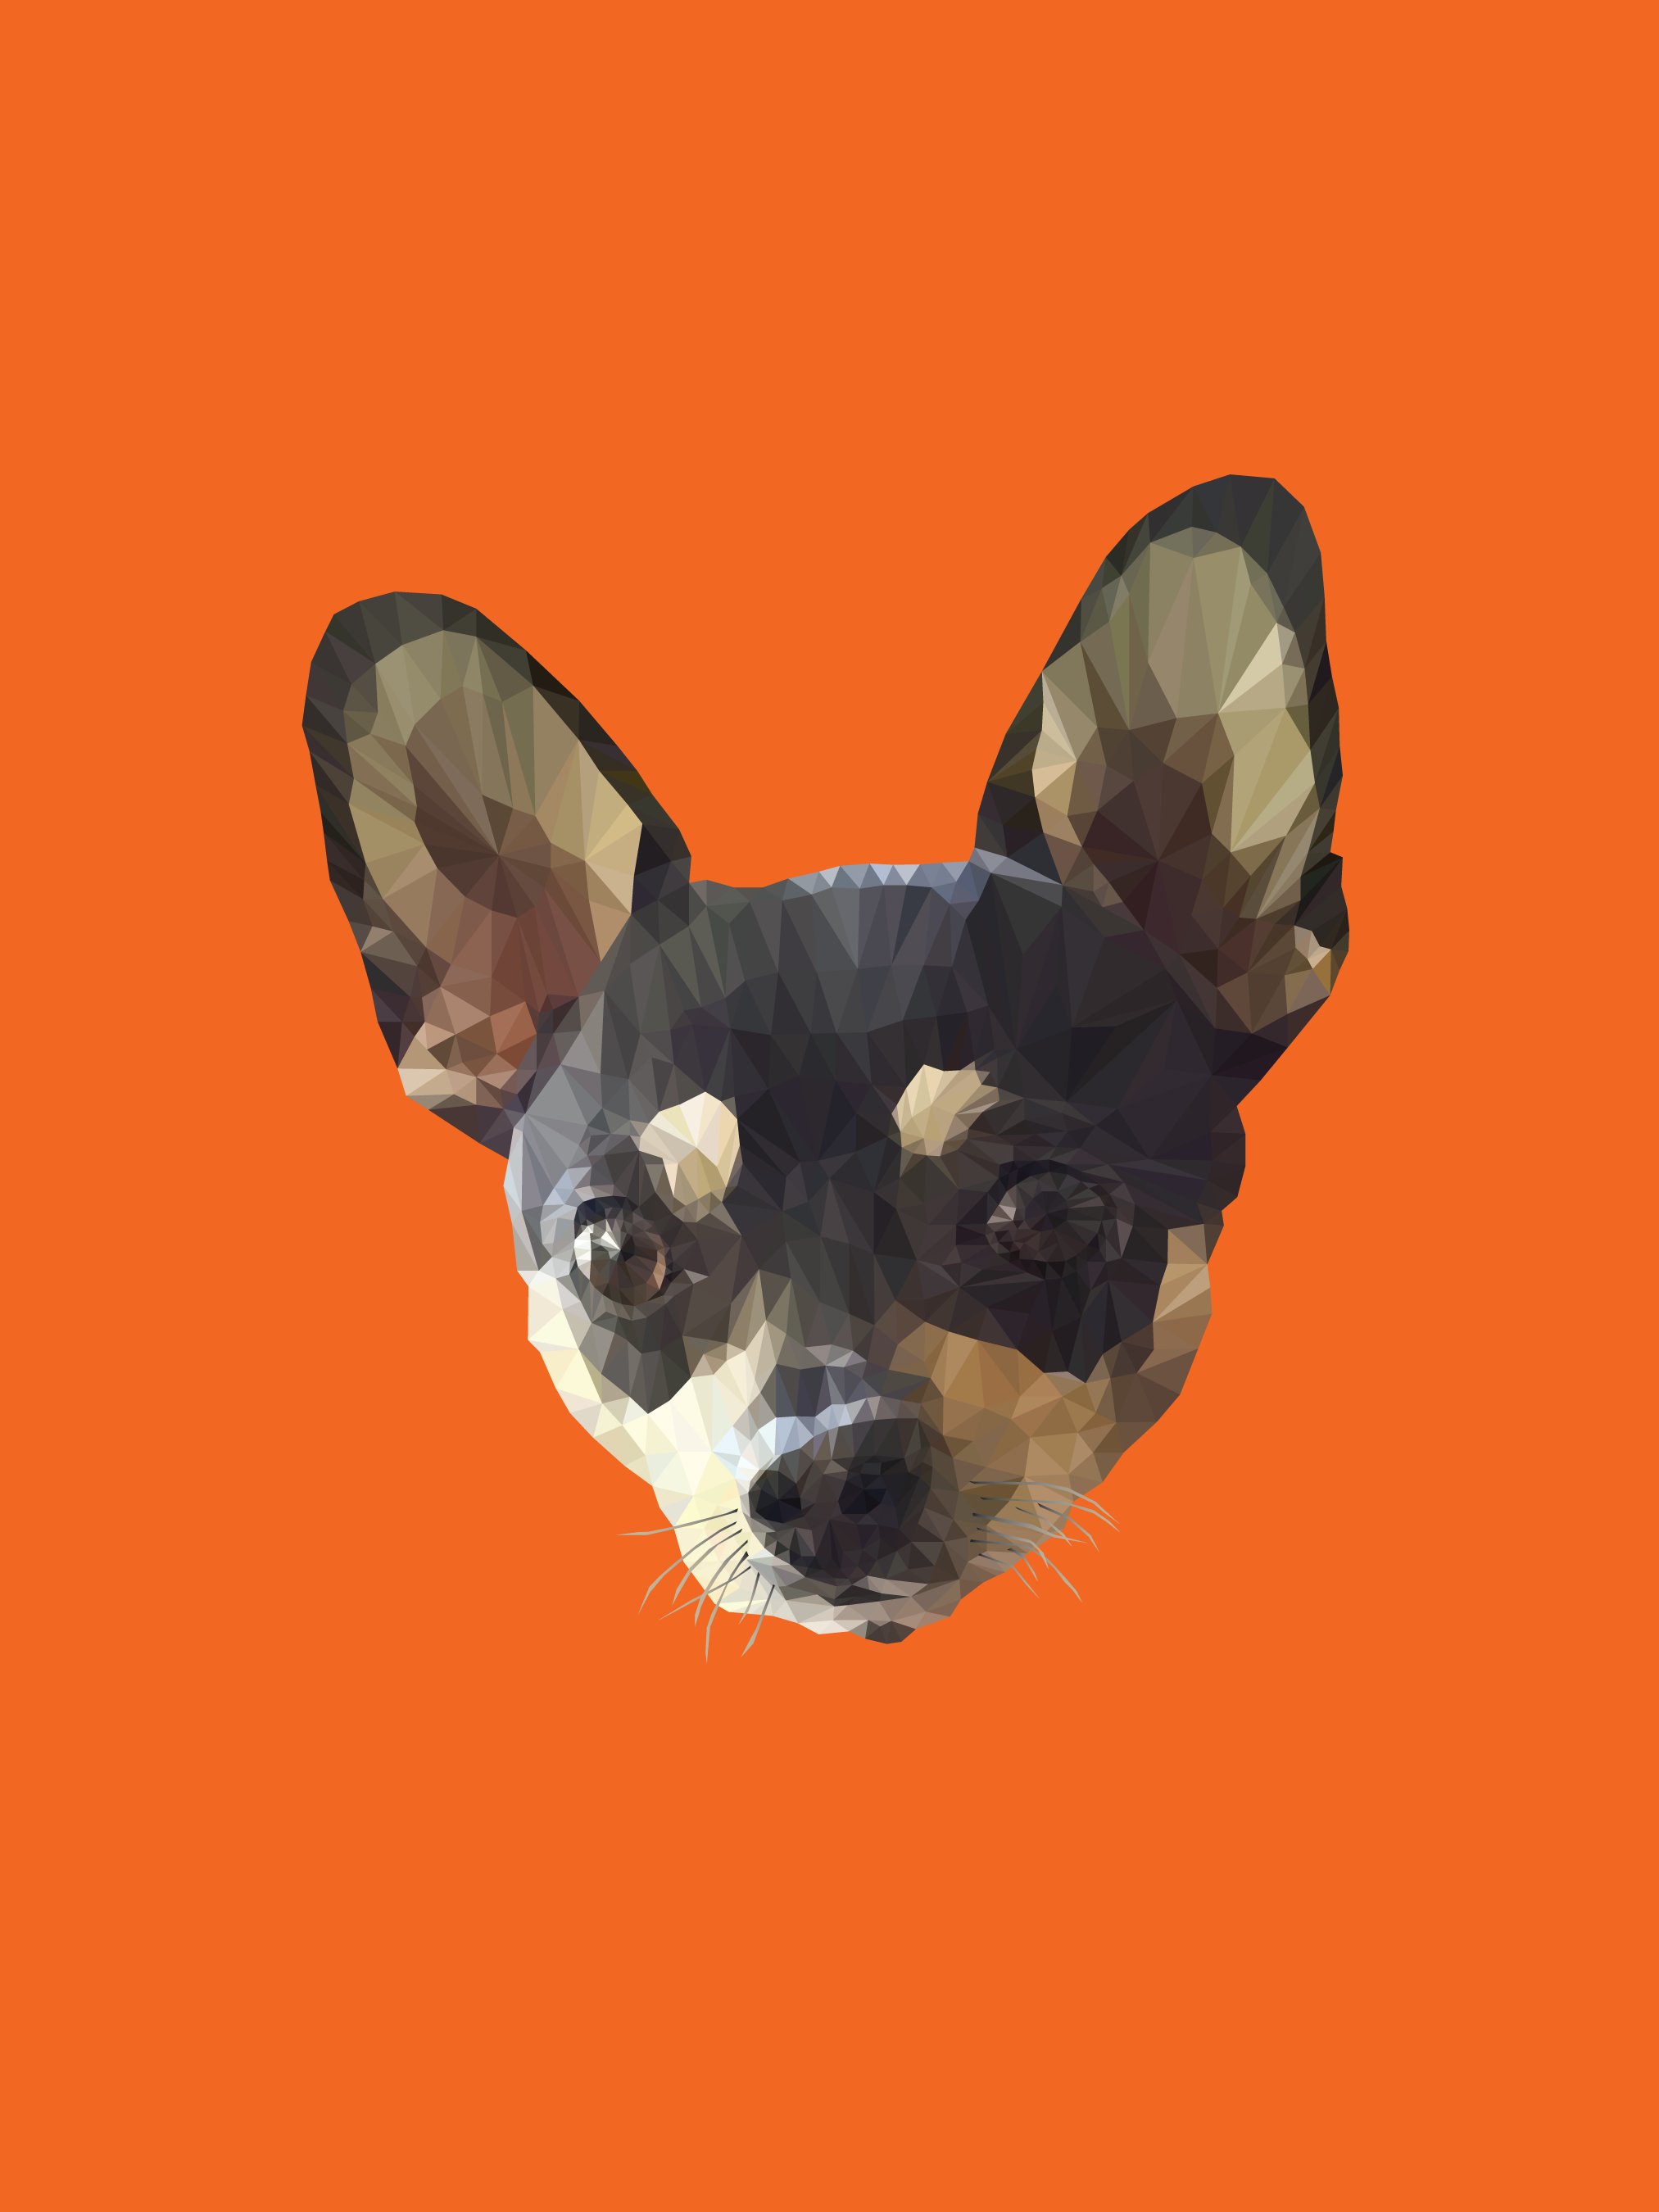 Low Poly Chihuahua illustration